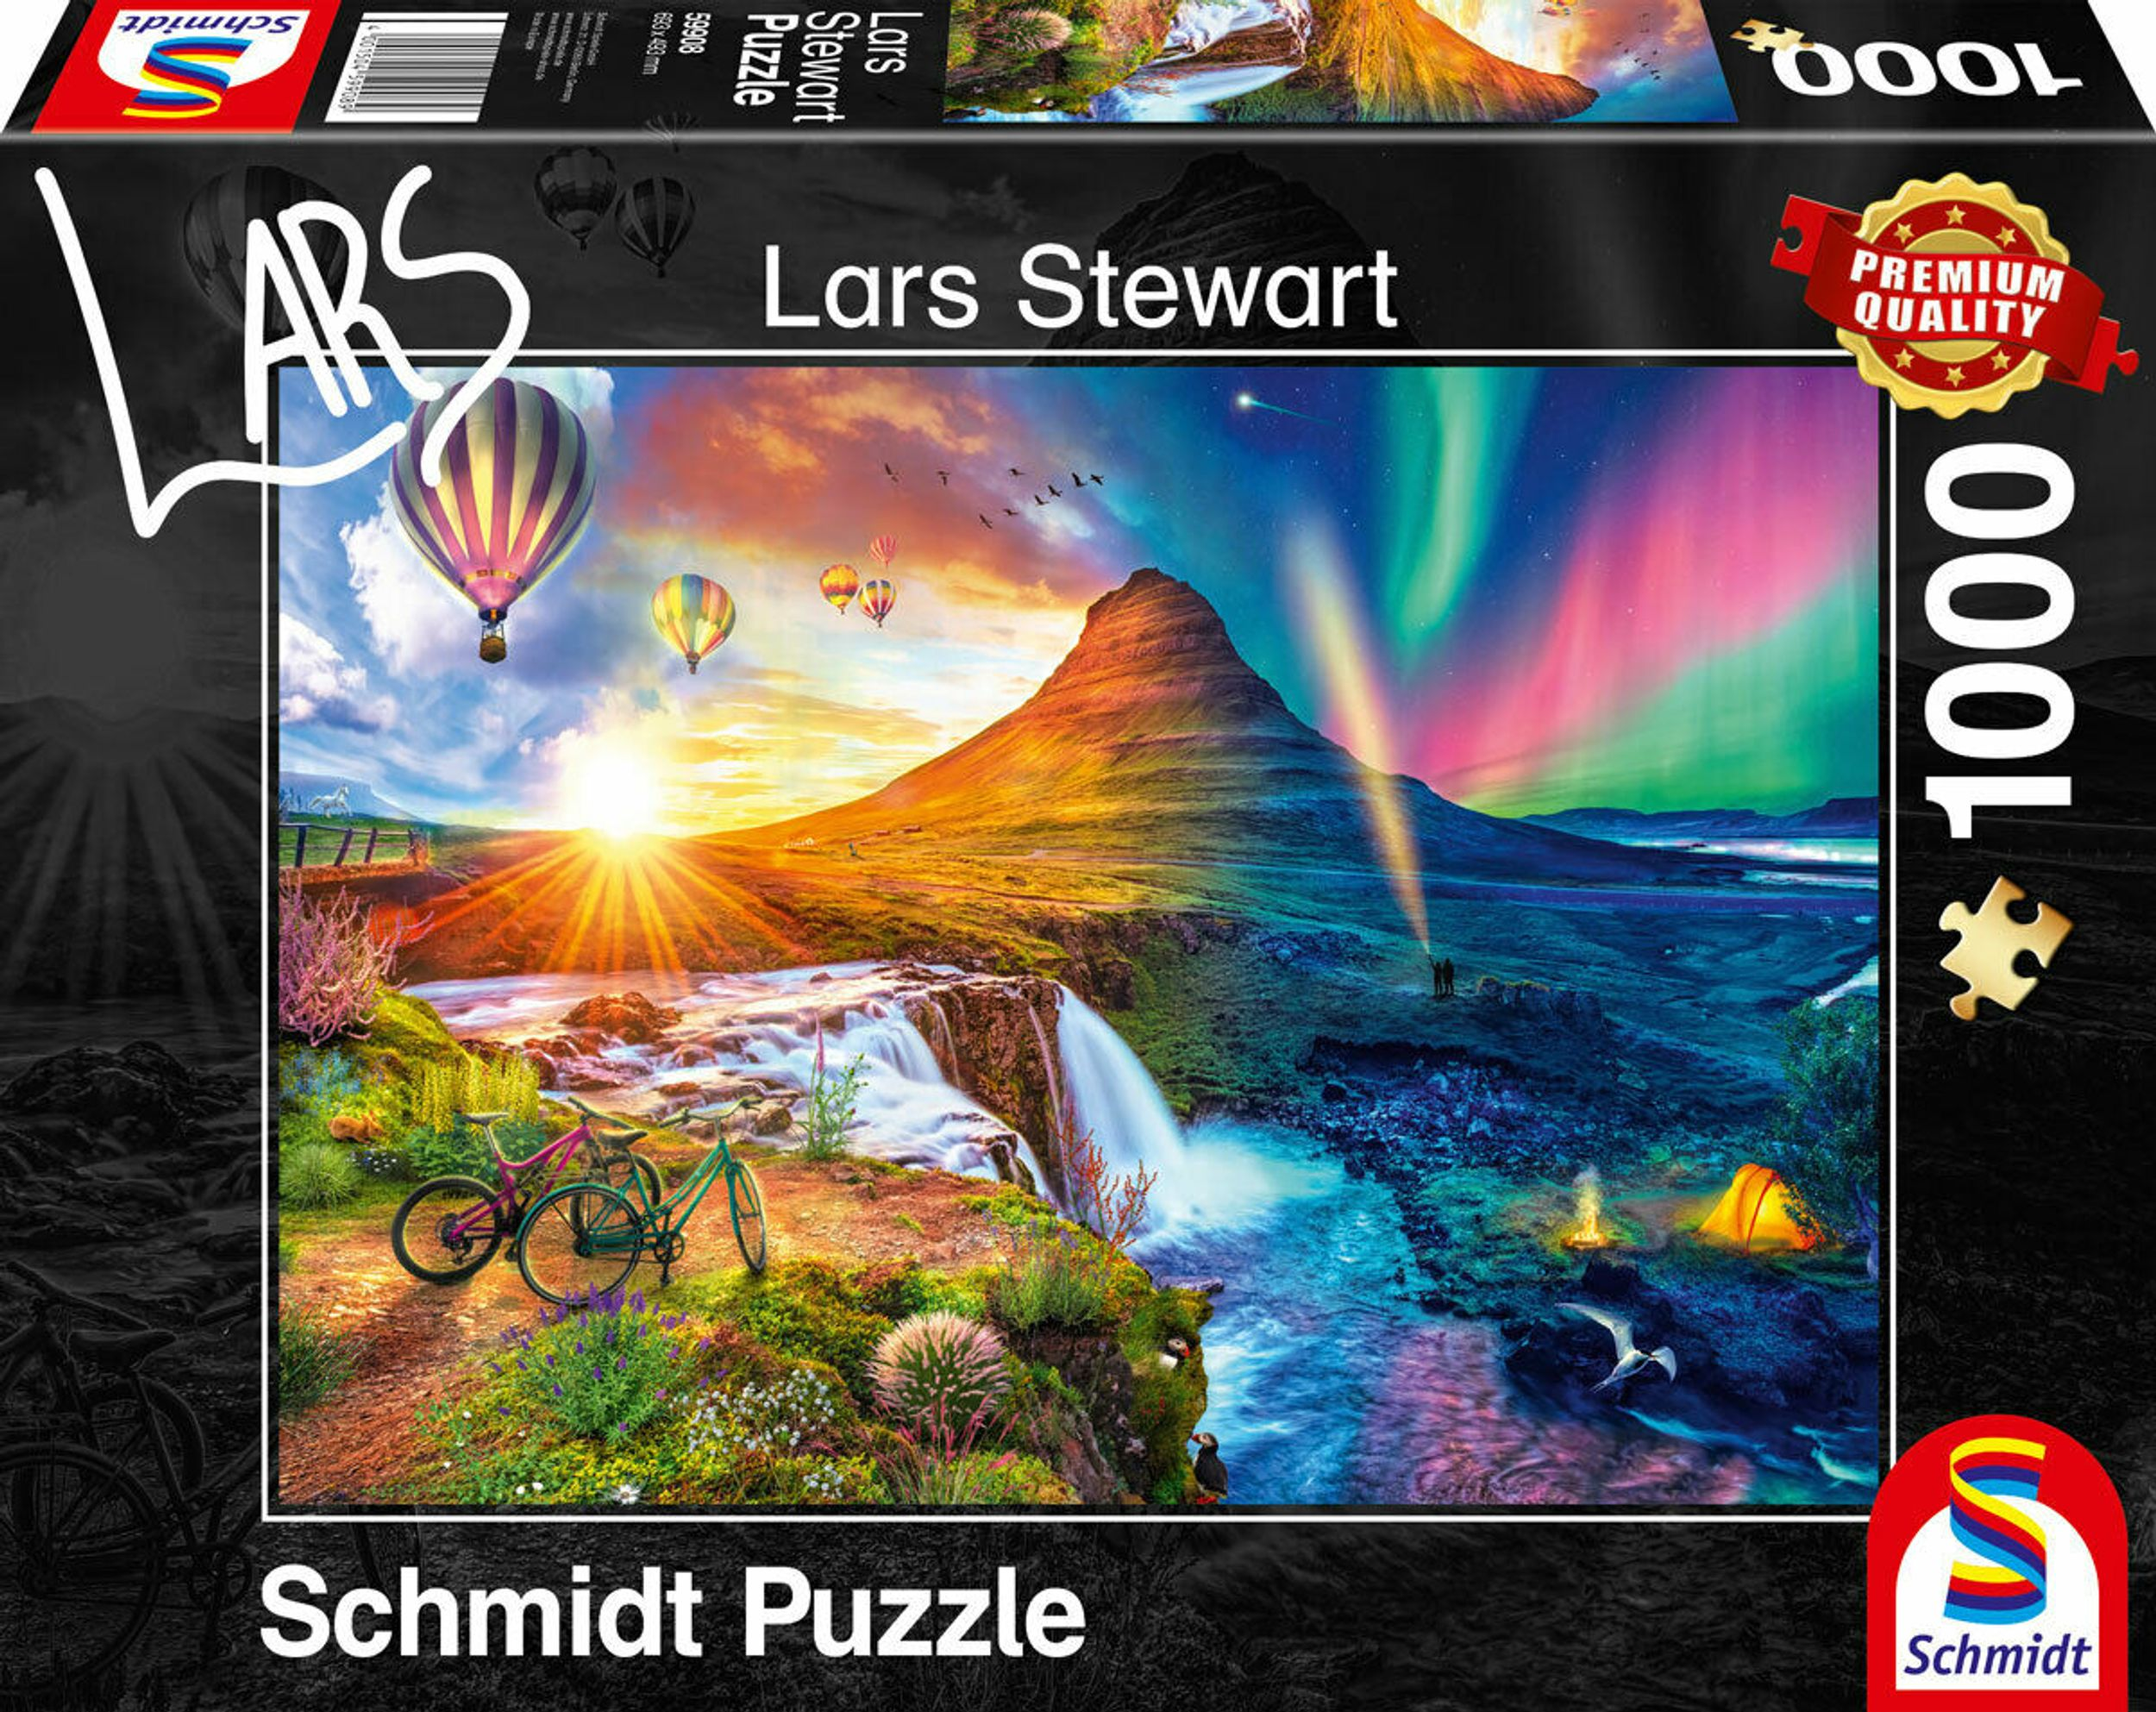 SCHMIDT SPIELE Island Night Day Puzzle and